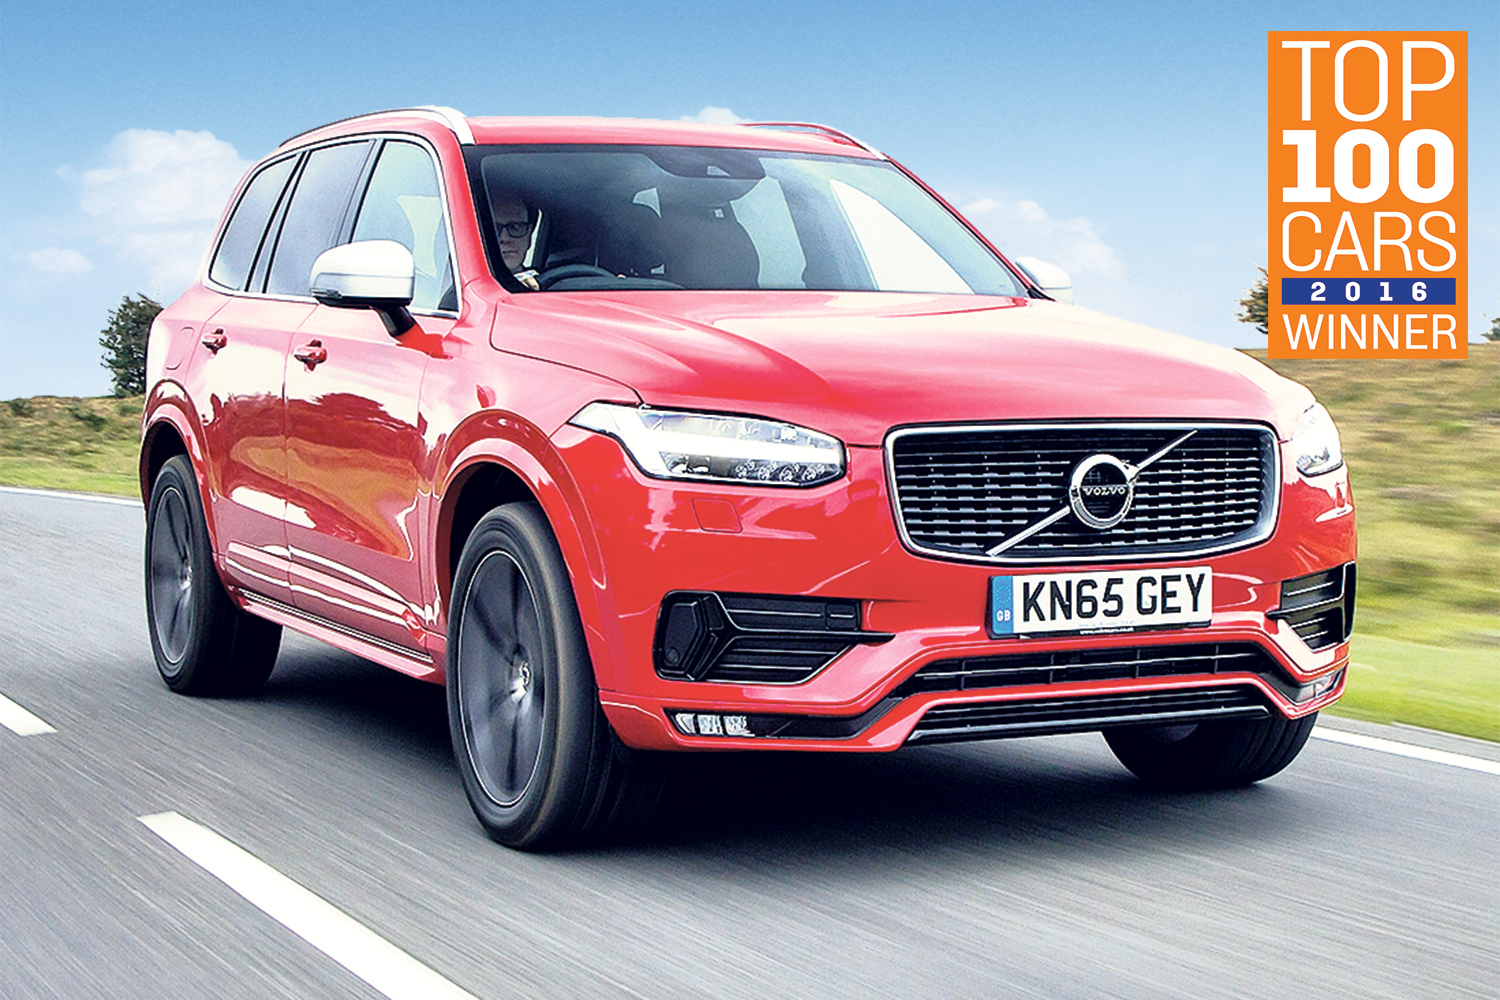 Volvo XC90: The Sunday Times Top 100 Cars 2016 Best Large 4x4 & SUV